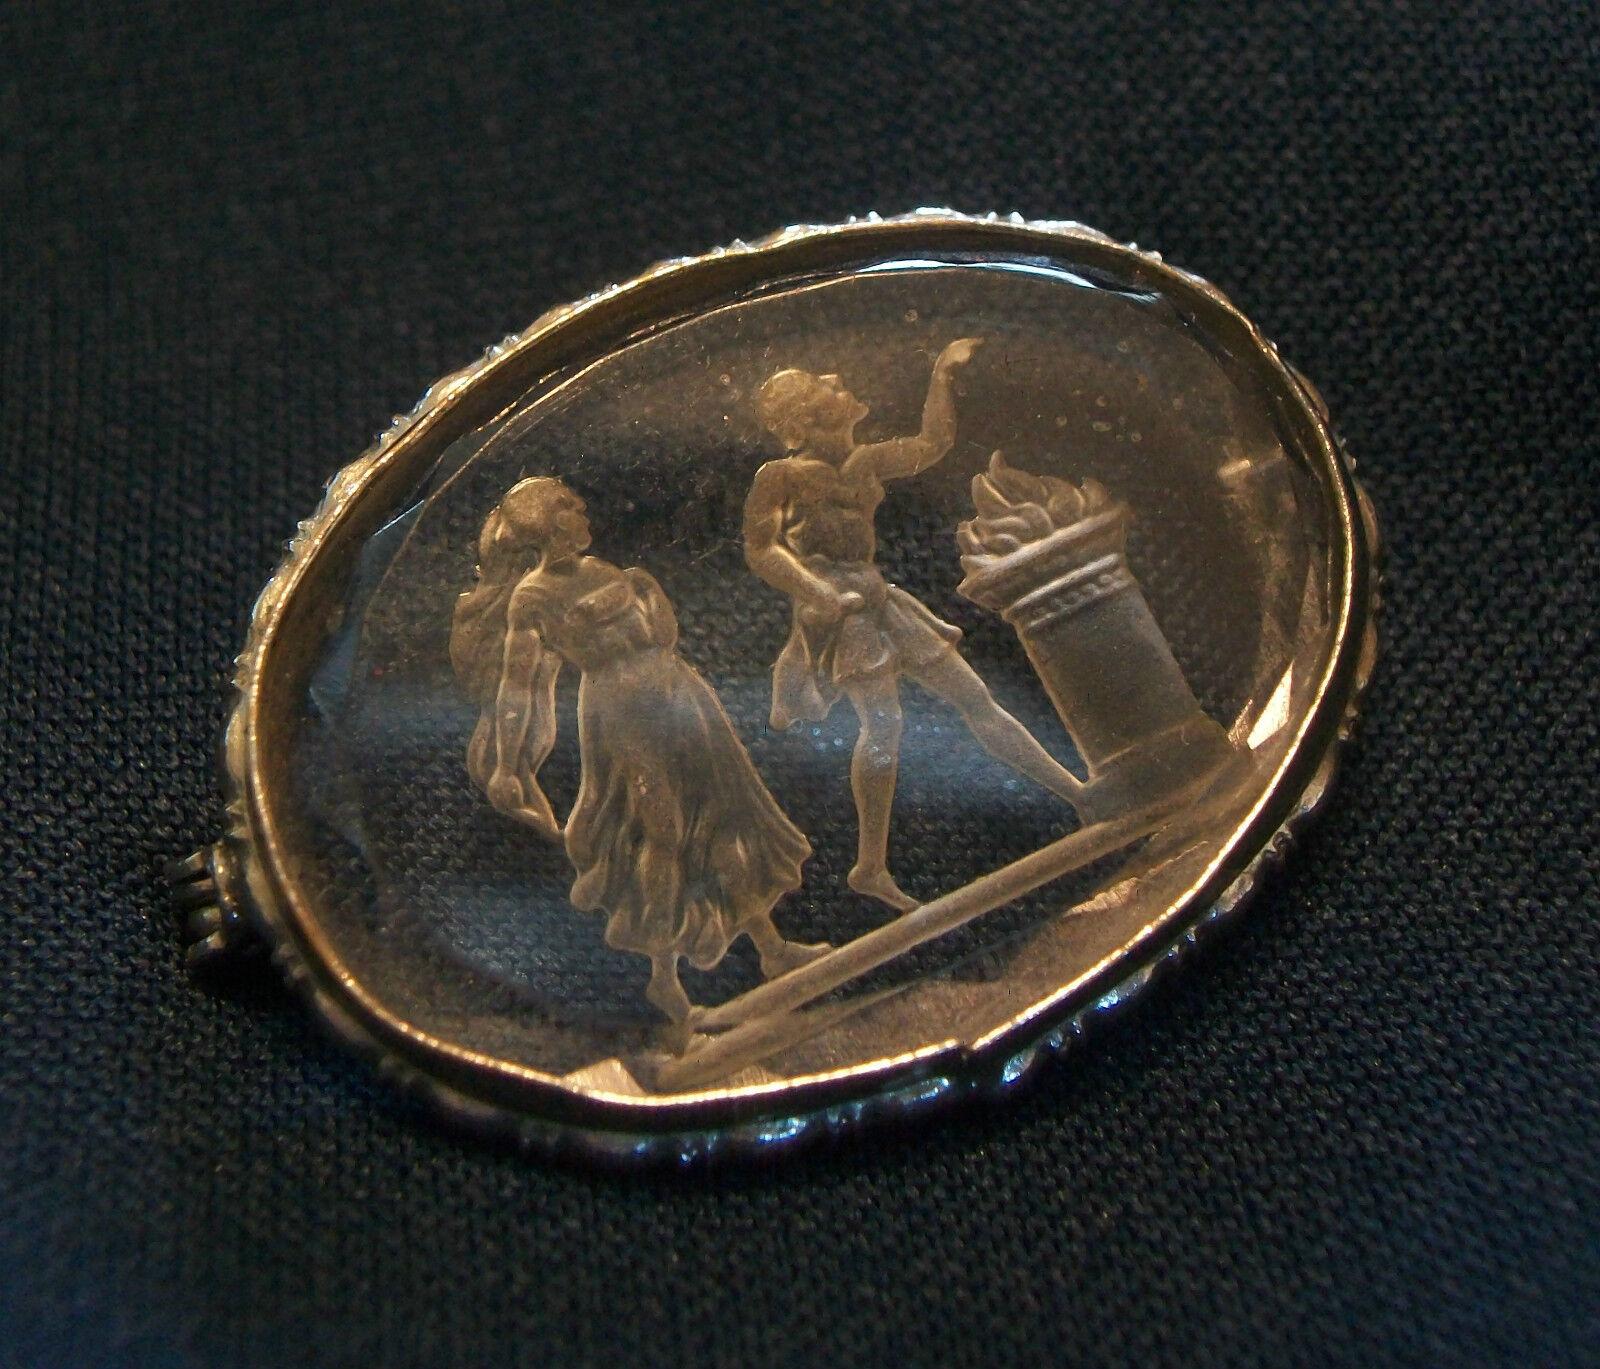 Antique crystal reverse intaglio brooch/pin - hand made silver alloy setting - 